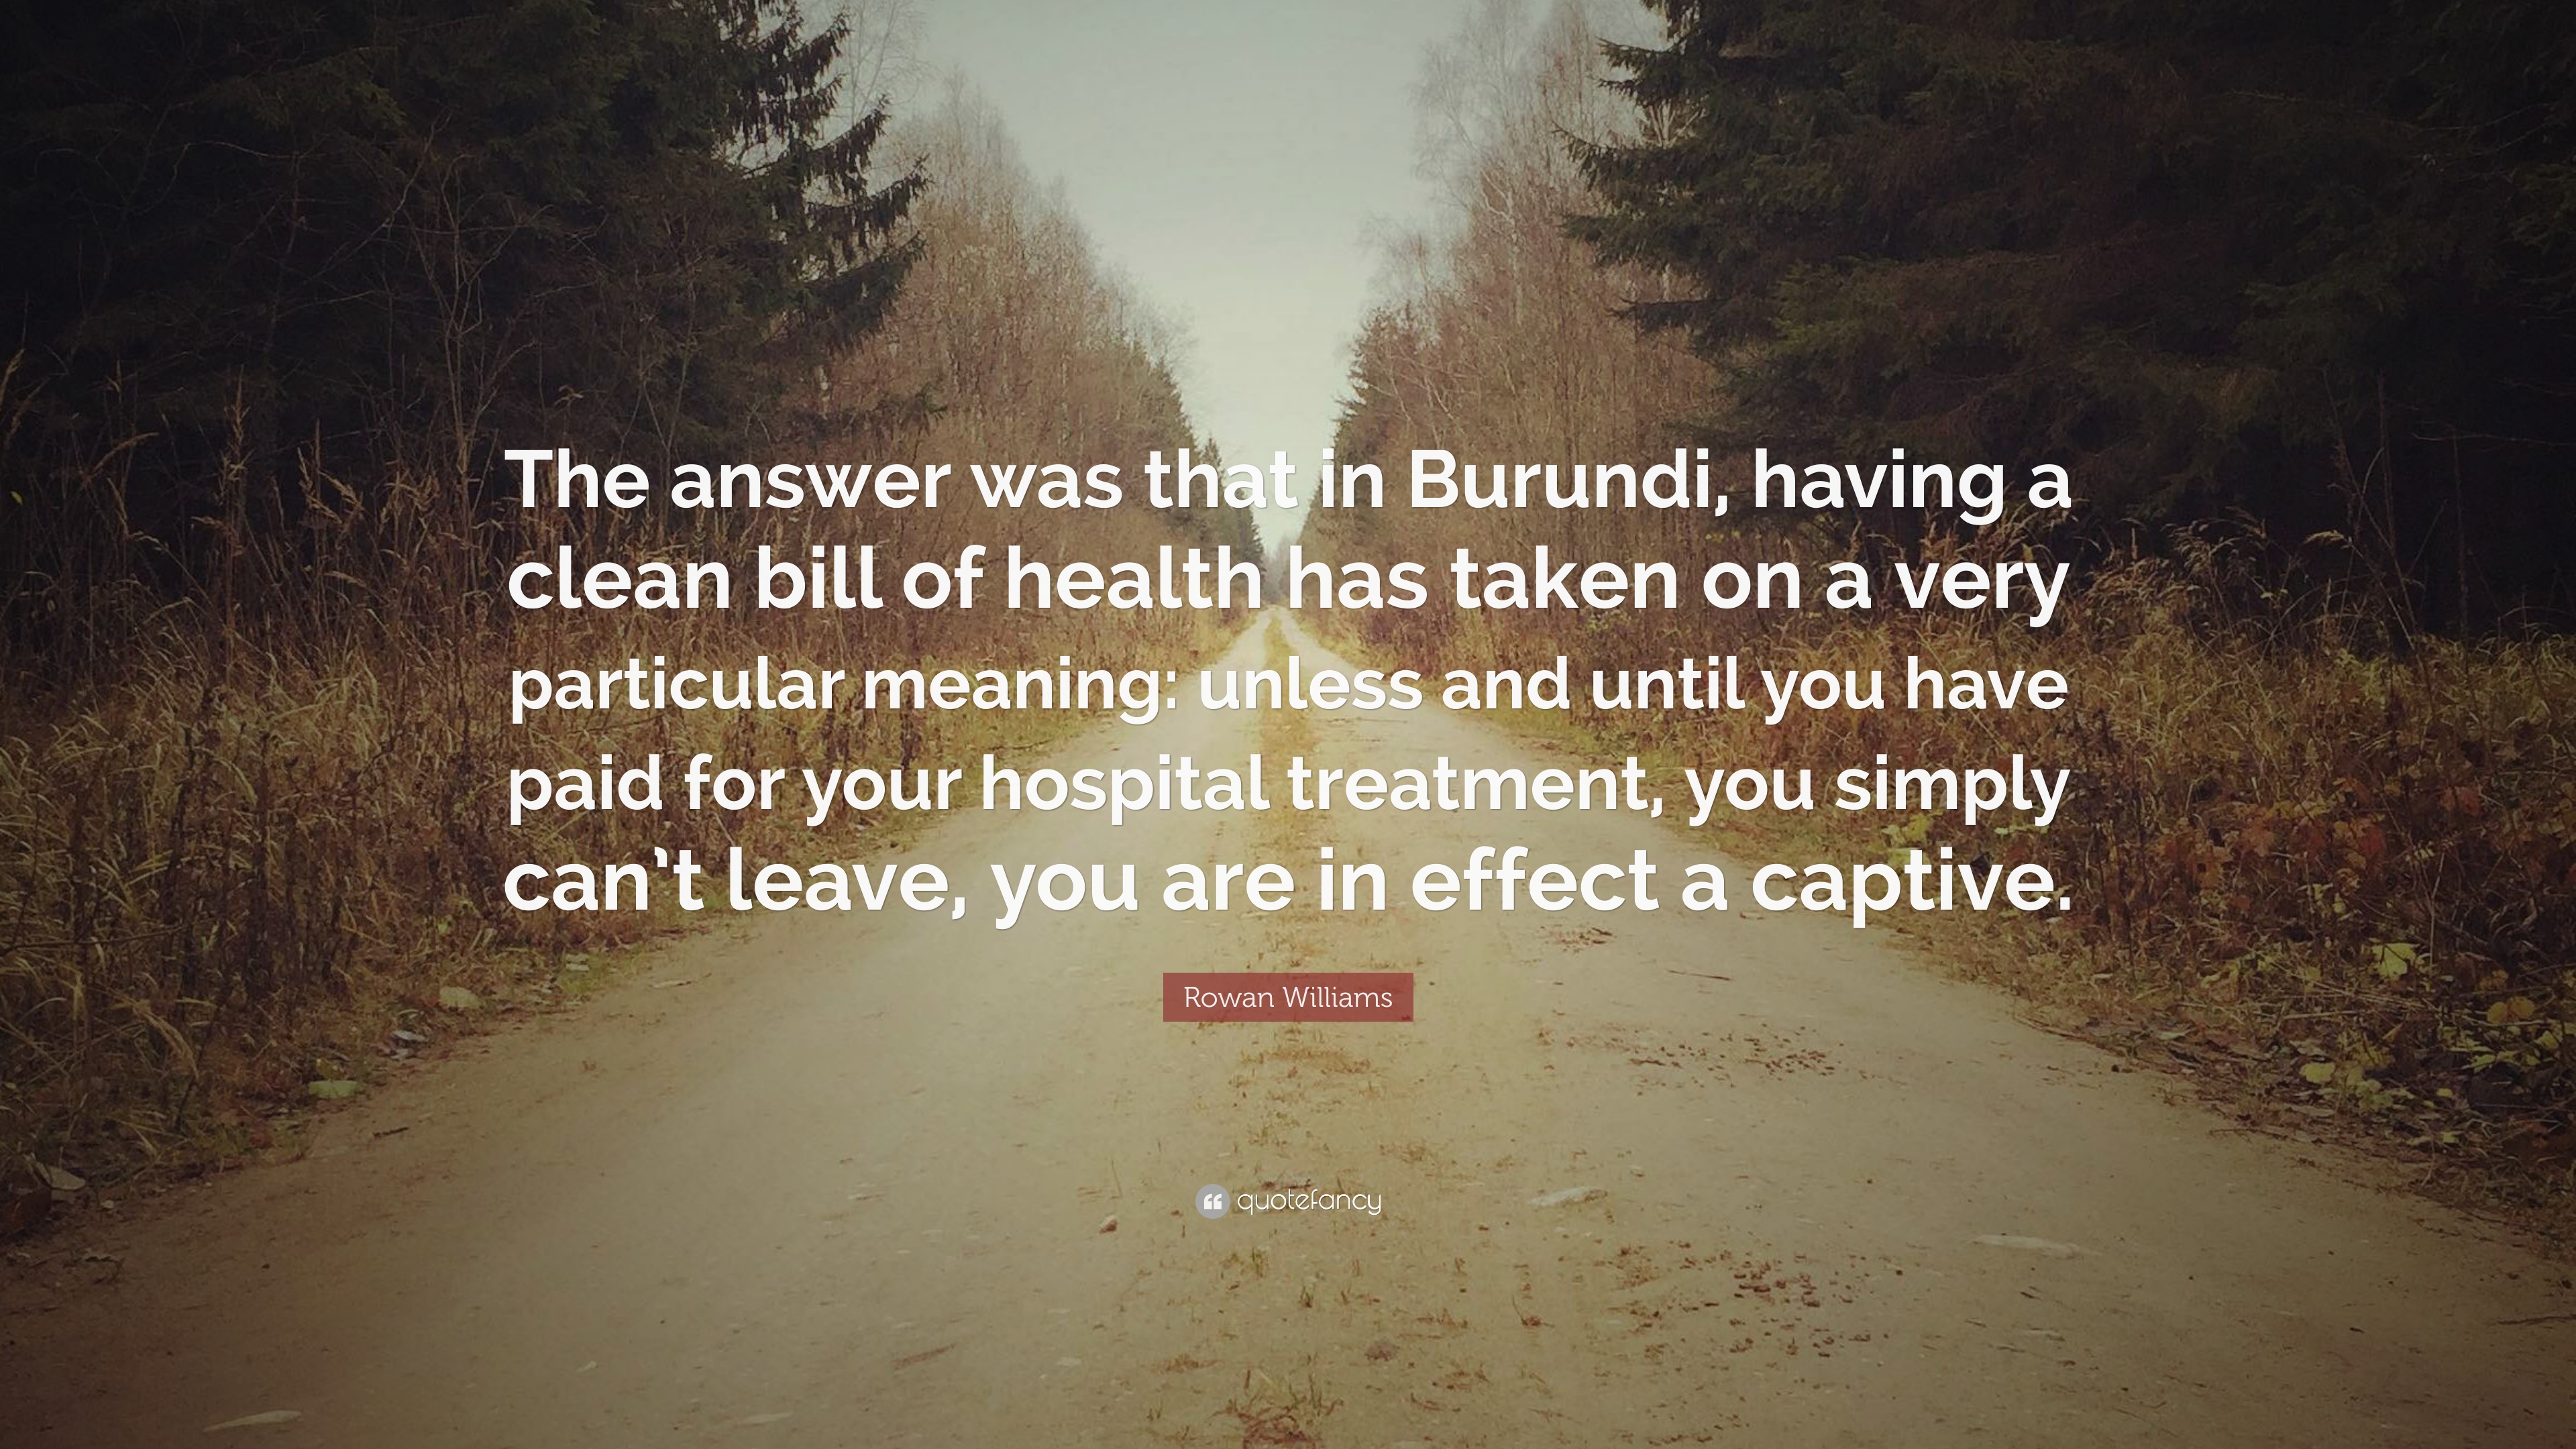 Rowan Williams Quote: “The answer was that in Burundi, having a